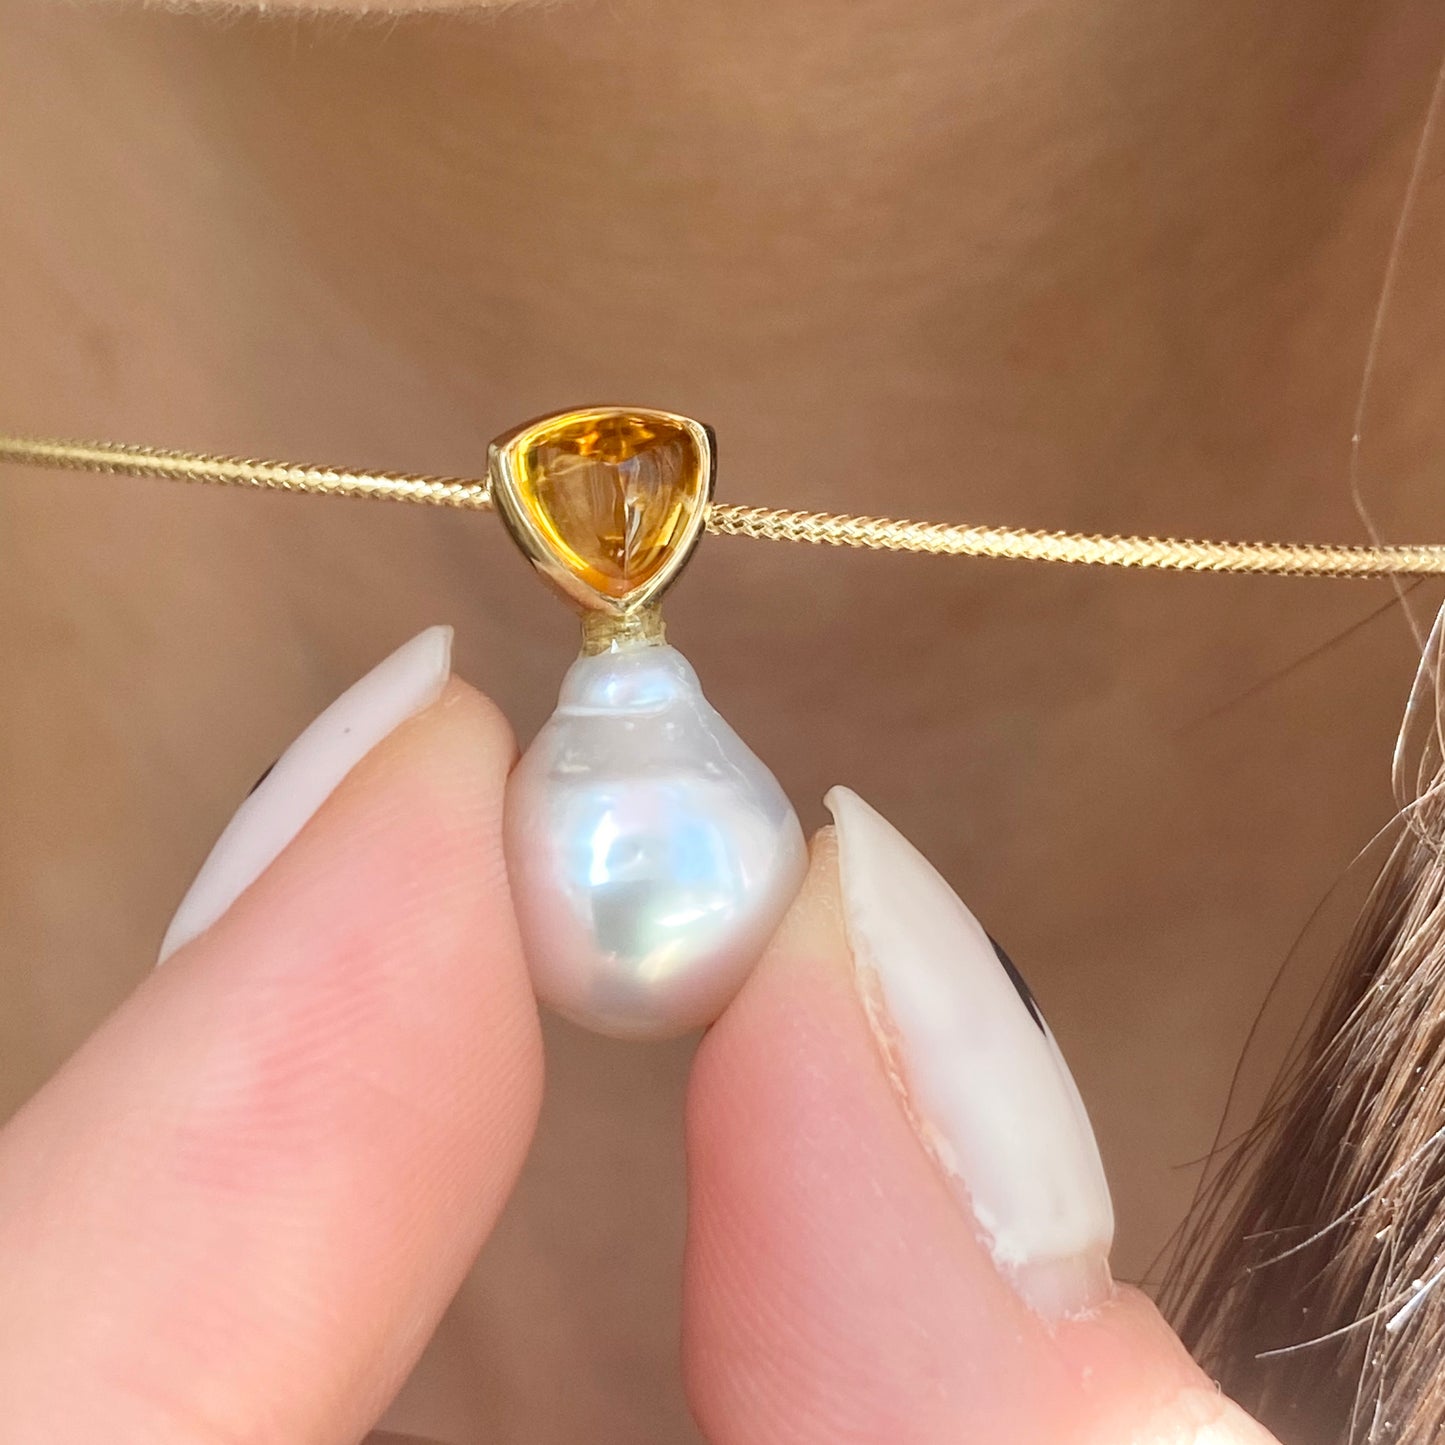 14KT Yellow Gold Trillion Citrine + 10mm Paspaley South Sea Pearl Pendant